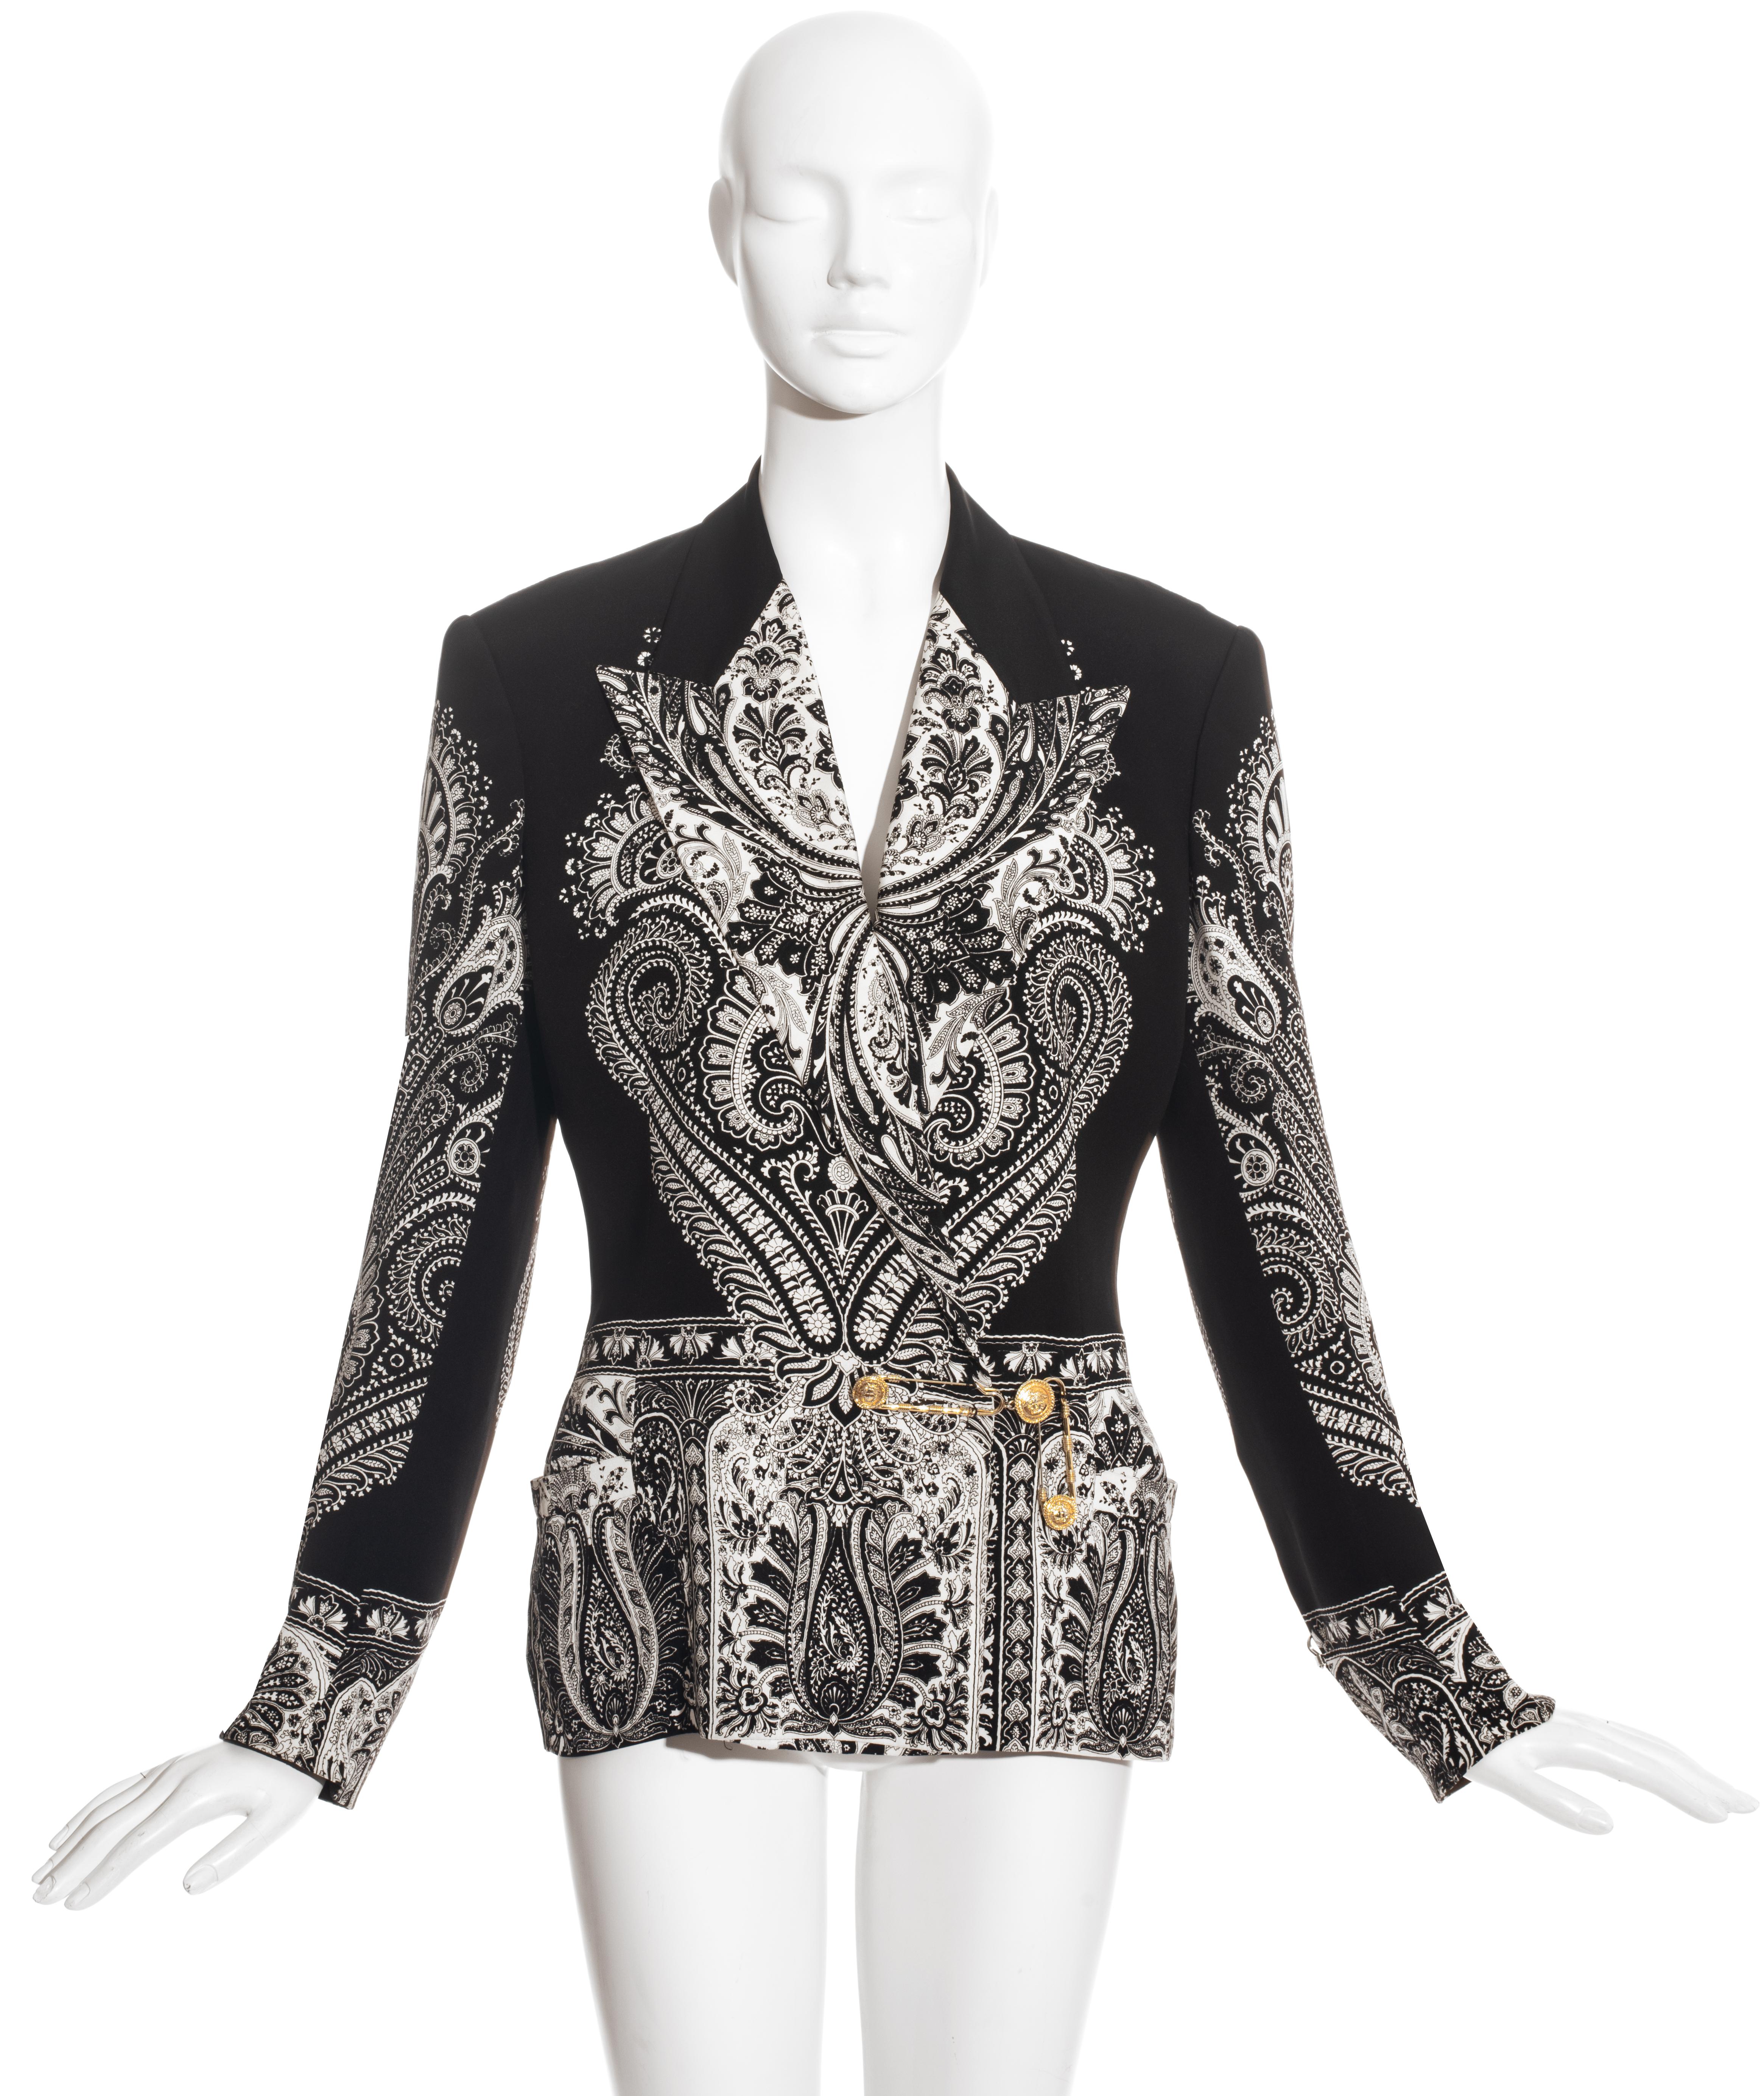 Gianni Versace black paisley printed silk blazer jacket with two gold safety-pin front closures and two silver safety-pins on the cuffs.

Spring-Summer 1994